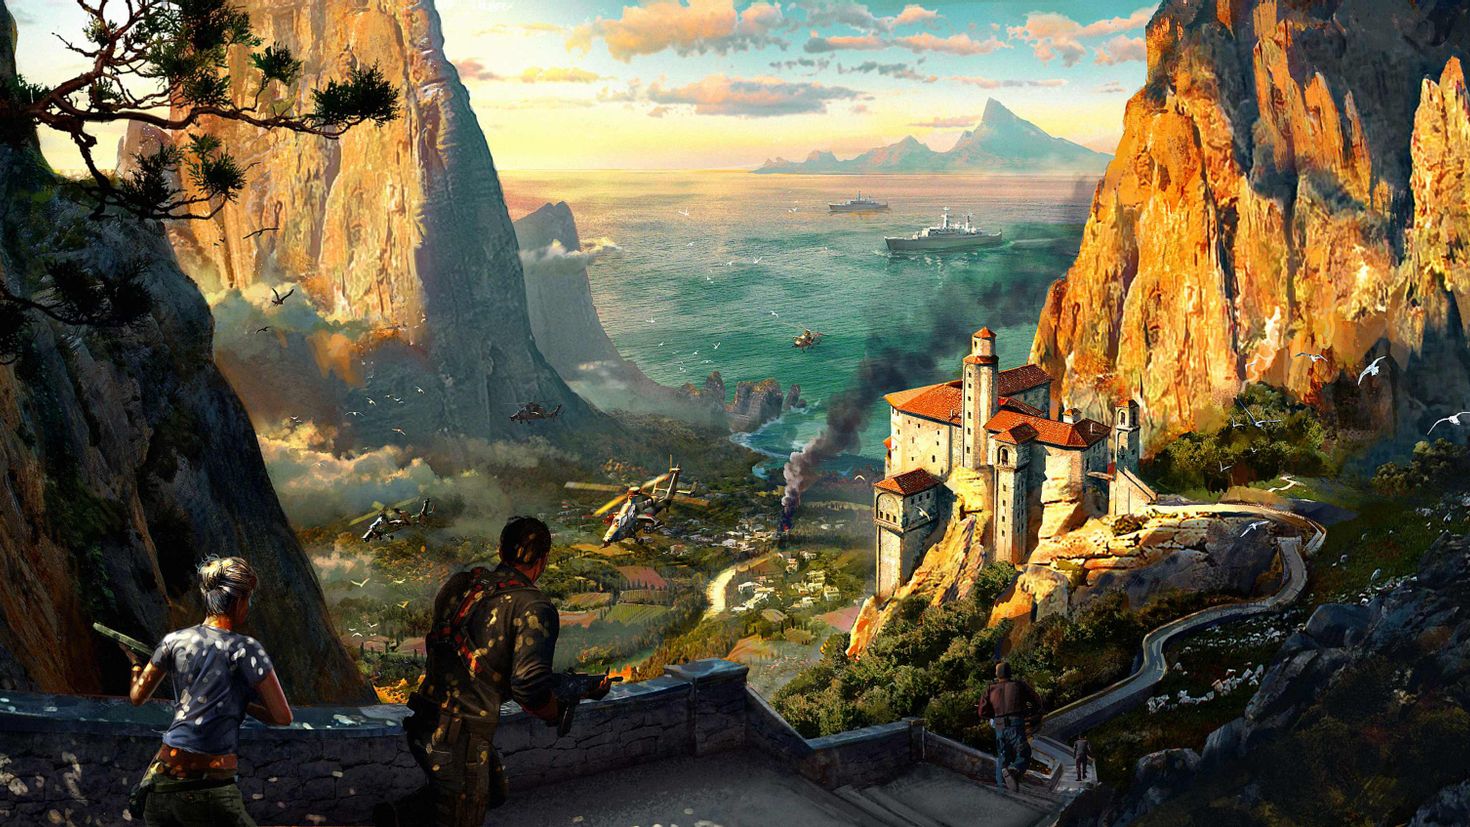 The best game in the world. Just cause 3 Art. Just cause 3 арты. Just cause 3 Concept Art. Игровые пейзажи.